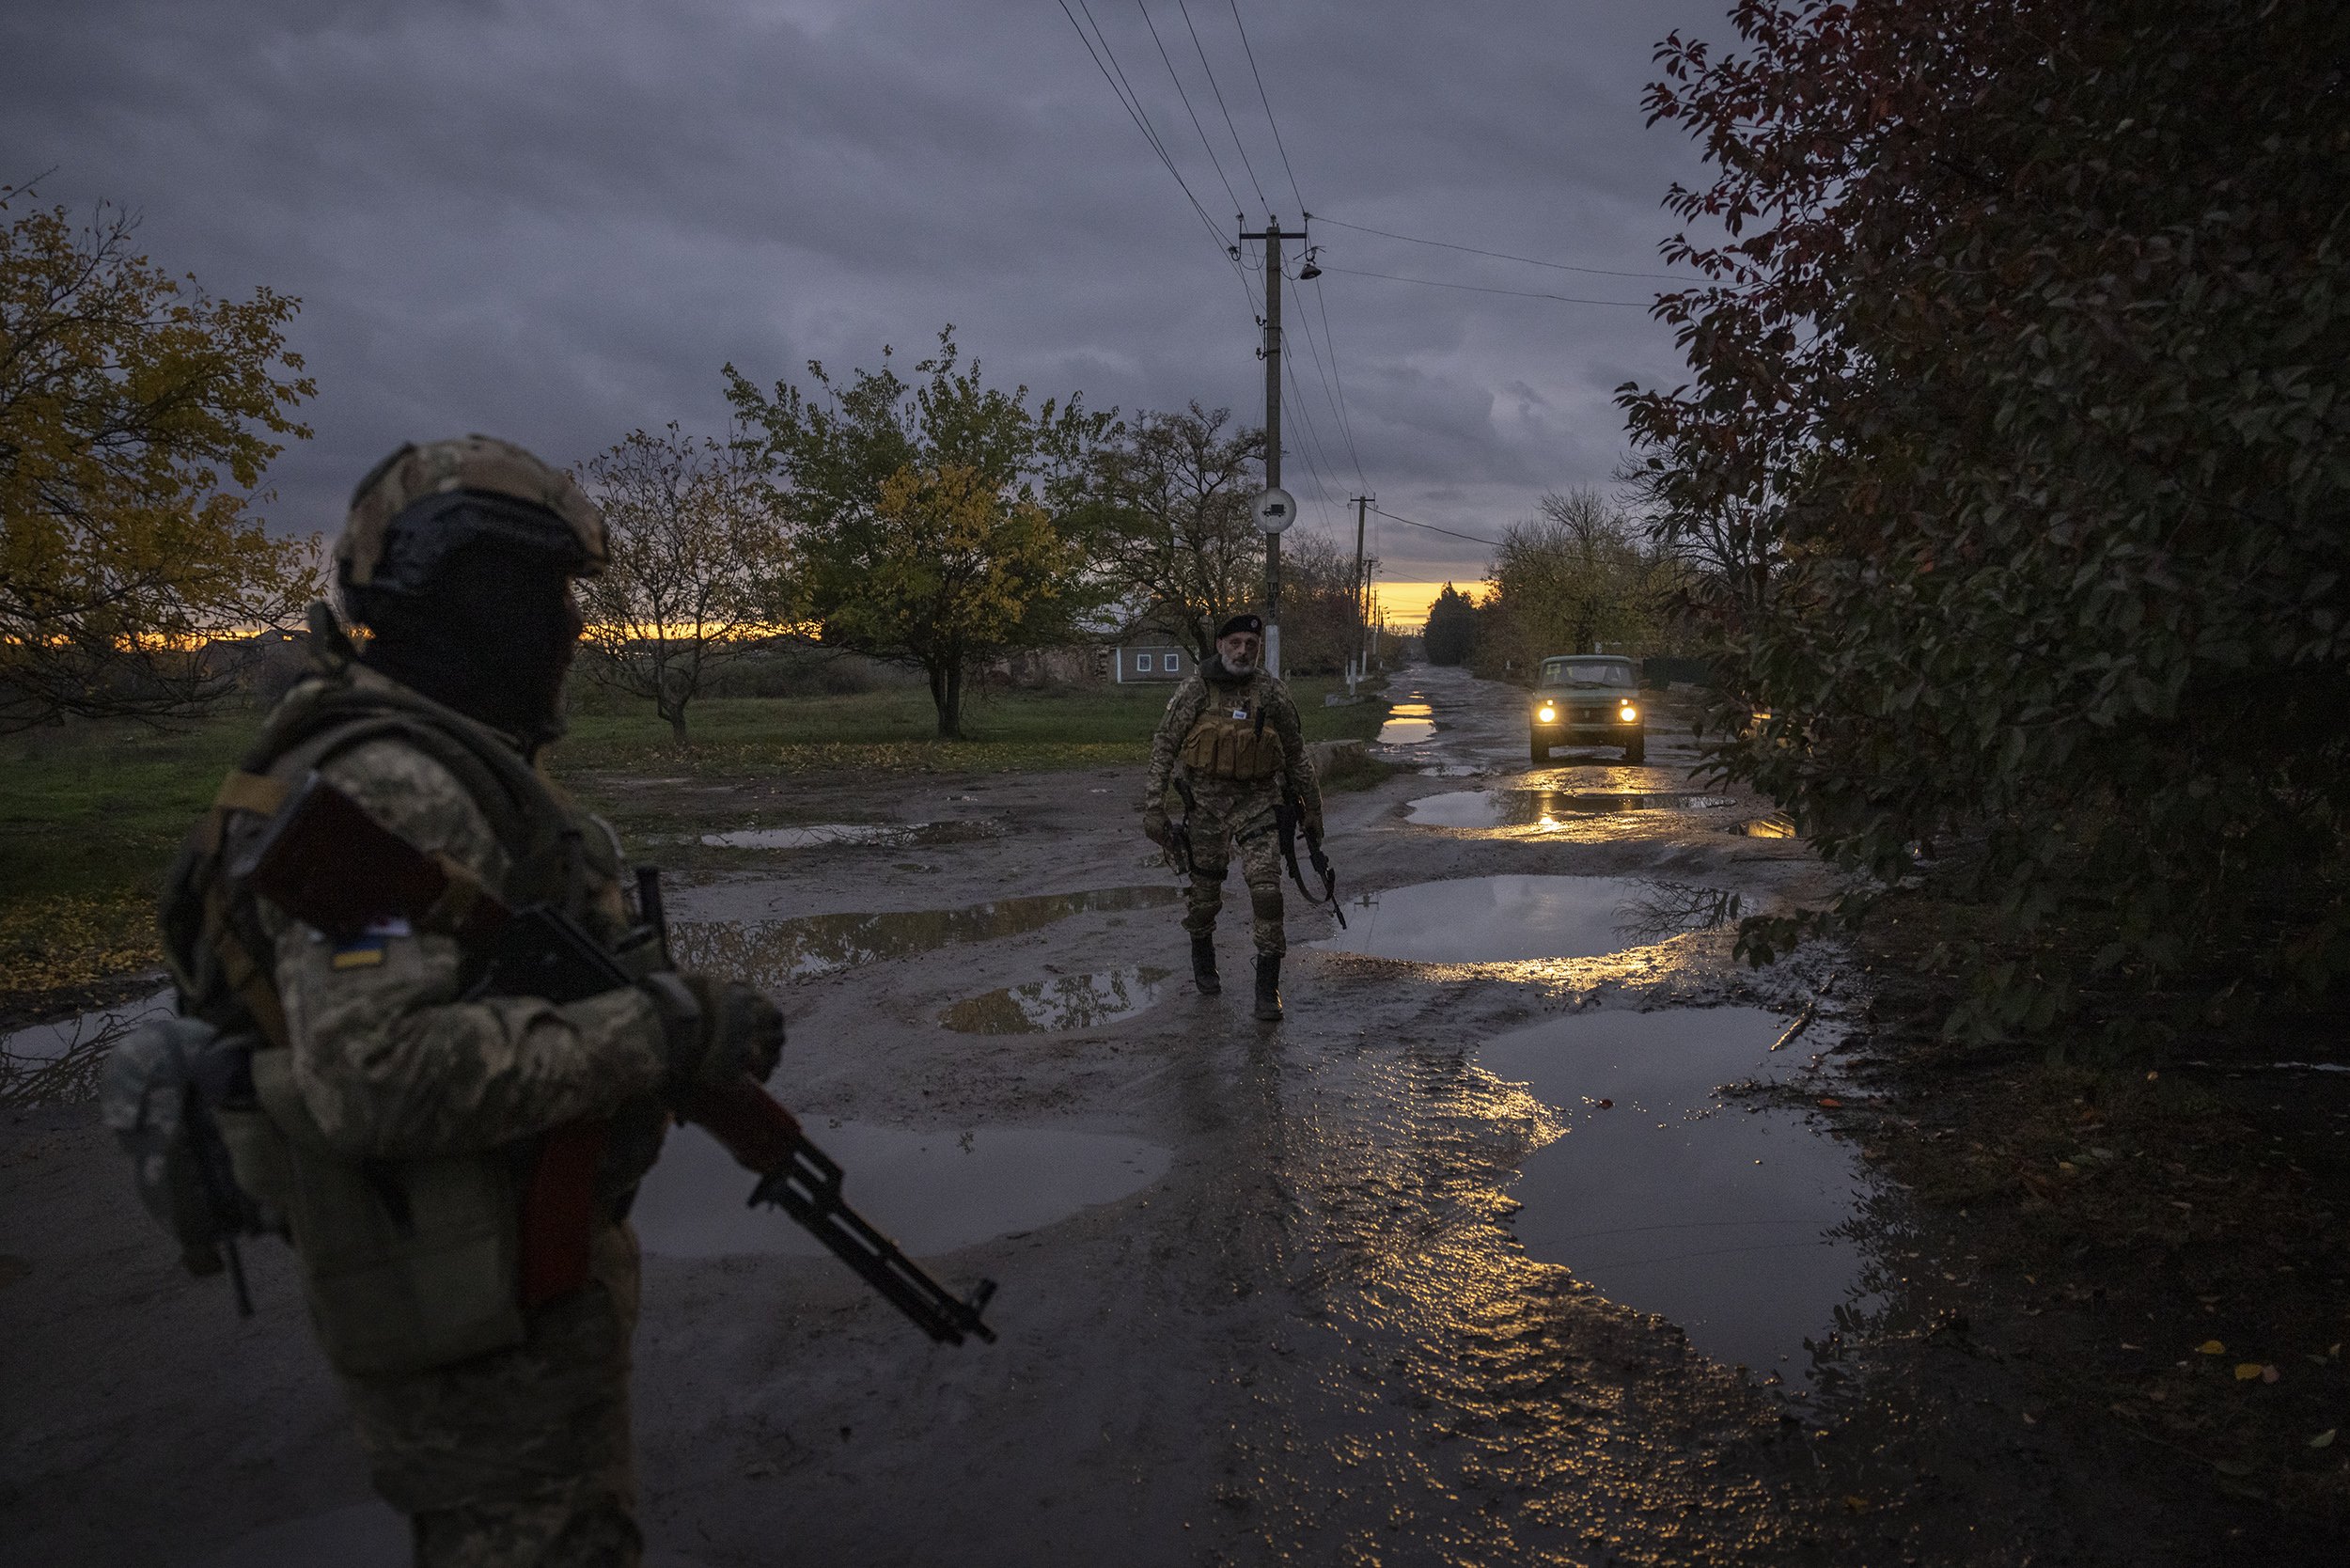  Soldiers with a reconnaissance unit of the 129th Brigade Territorial Defence Forces, returned to the village where they would stay for the night before going on an operation the next day on the frontline in the Kherson region of Ukraine. October, 20